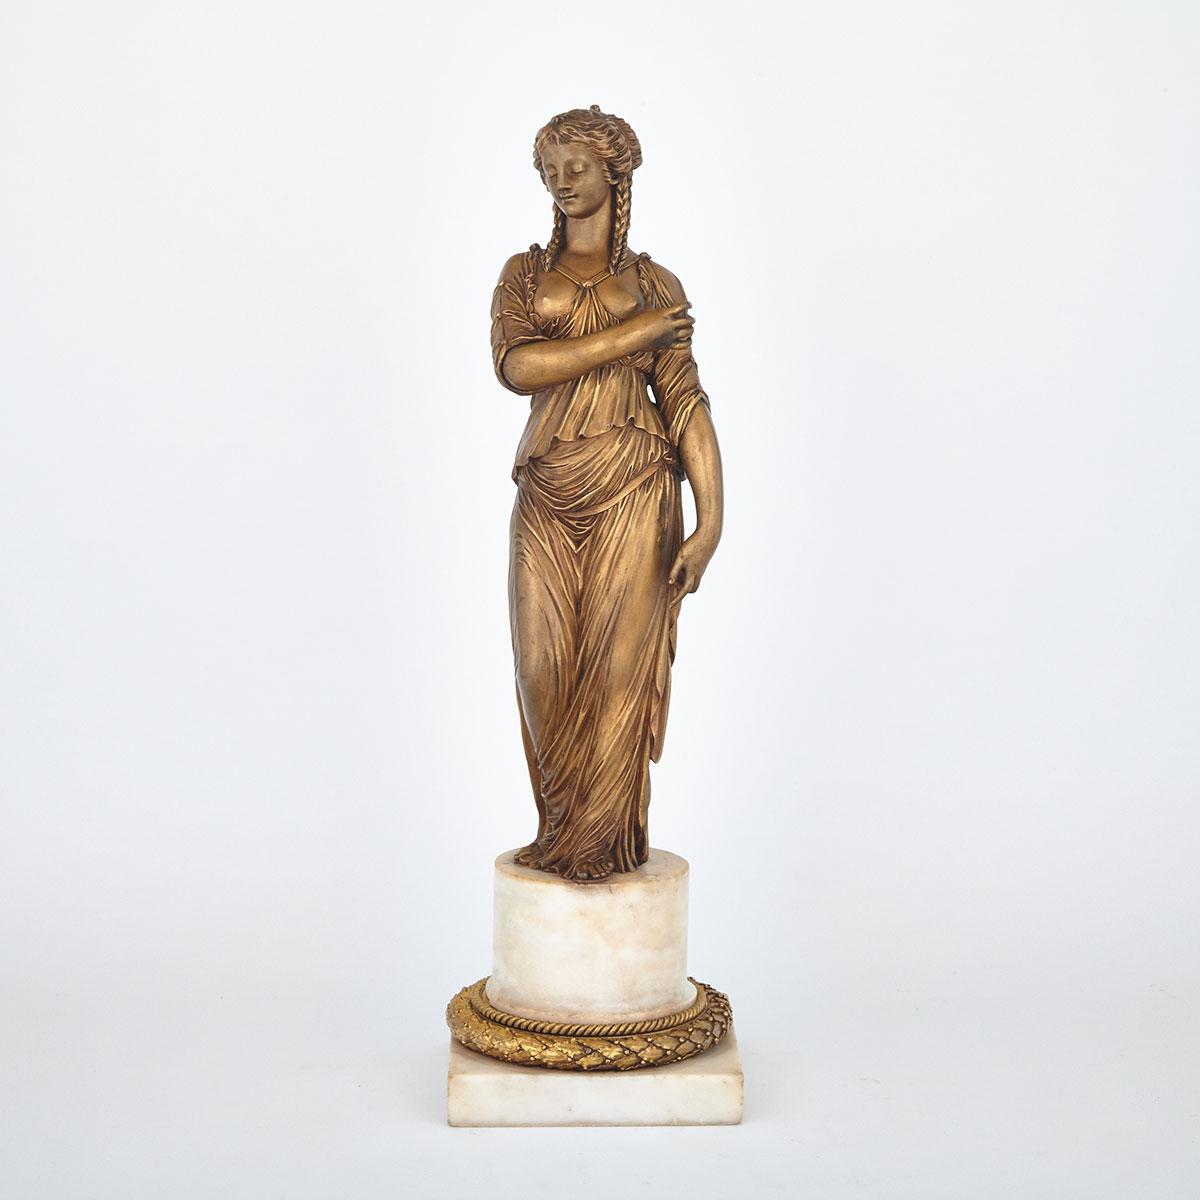 French Gilt Bronze Figure of a Classical Greek Maiden, mid 19th century